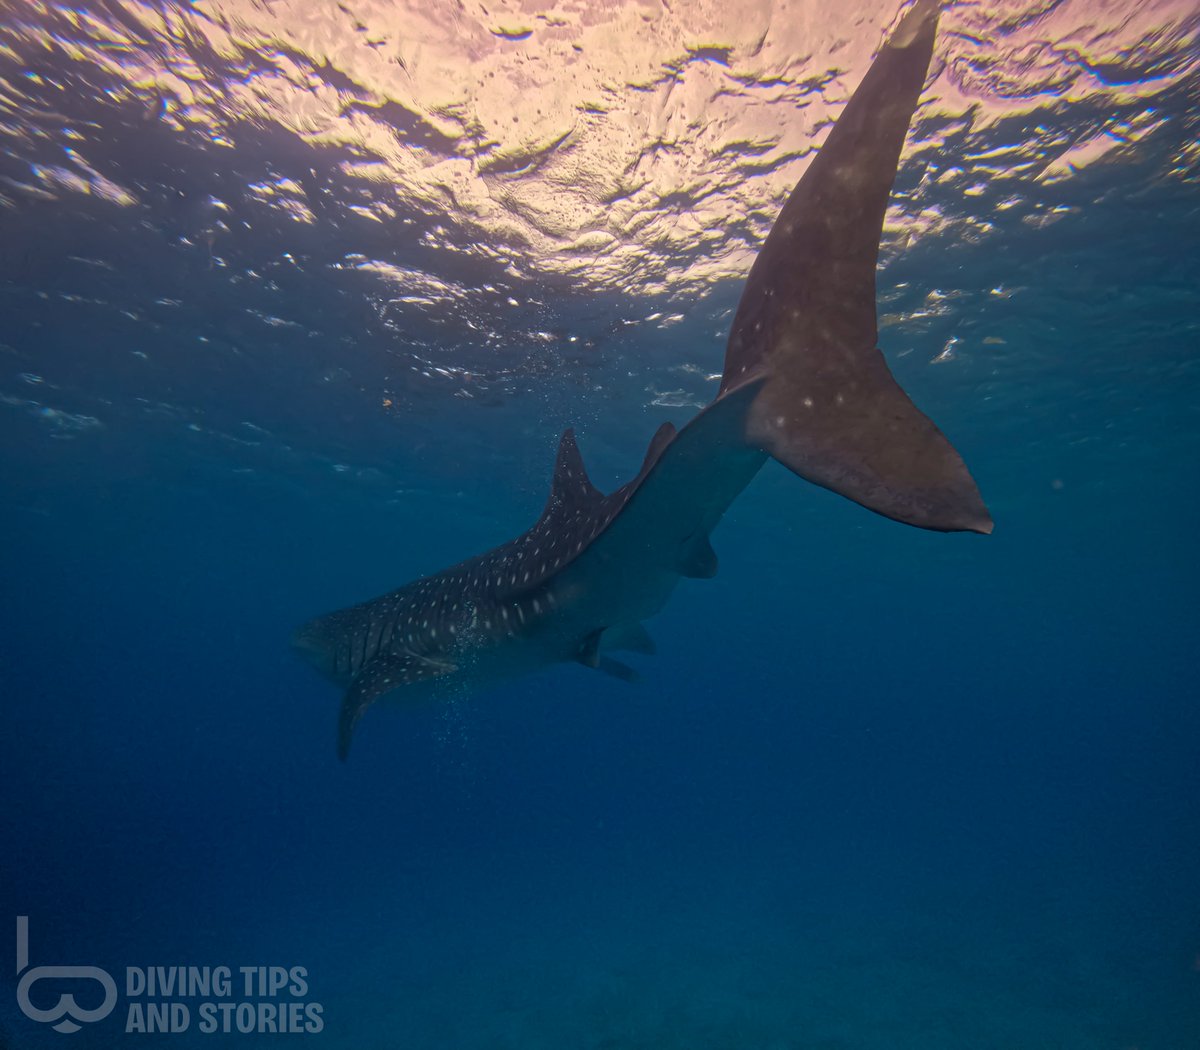 Have you ever seen whale sharks before? I saw this giant around Bohol in the Philippines!

For more photos and videos of whale sharks please follow my Instagram!😎

#traveltipsandstories #divingtipsandstories #sharks #sharksofinstagram #shark #ilovesharks #sharkattack #sharklover